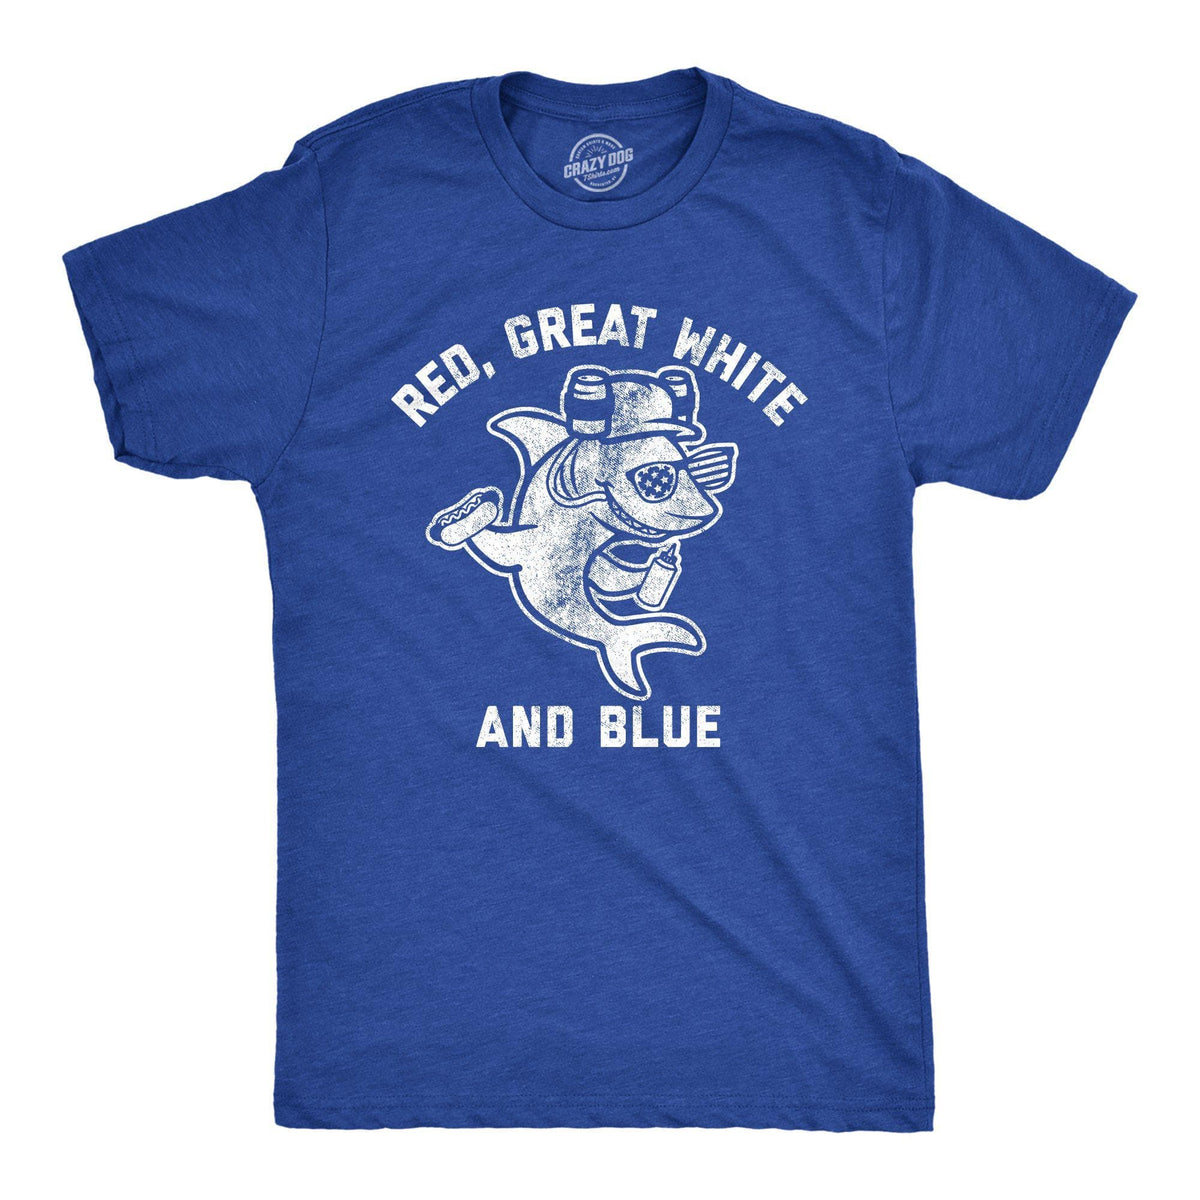 Red, Great White, And Blue Men&#39;s Tshirt - Crazy Dog T-Shirts